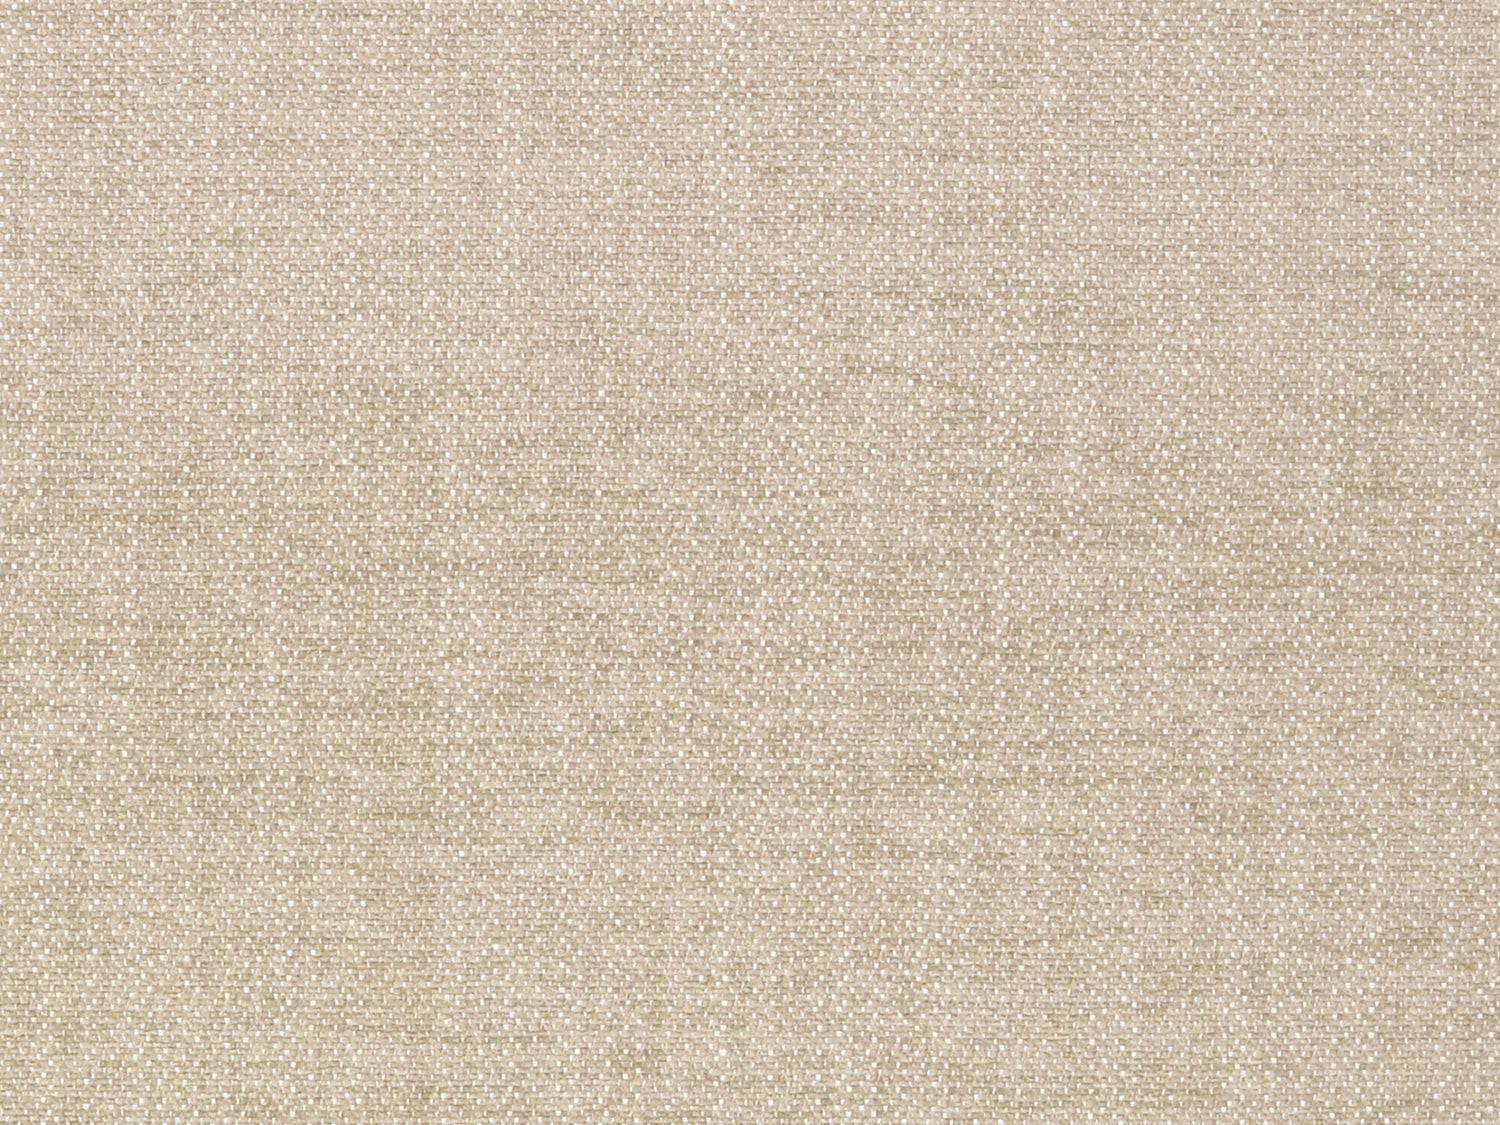 San Miguel Texture fabric in biscuit color - pattern number LU 00068257 - by Scalamandre in the Old World Weavers collection